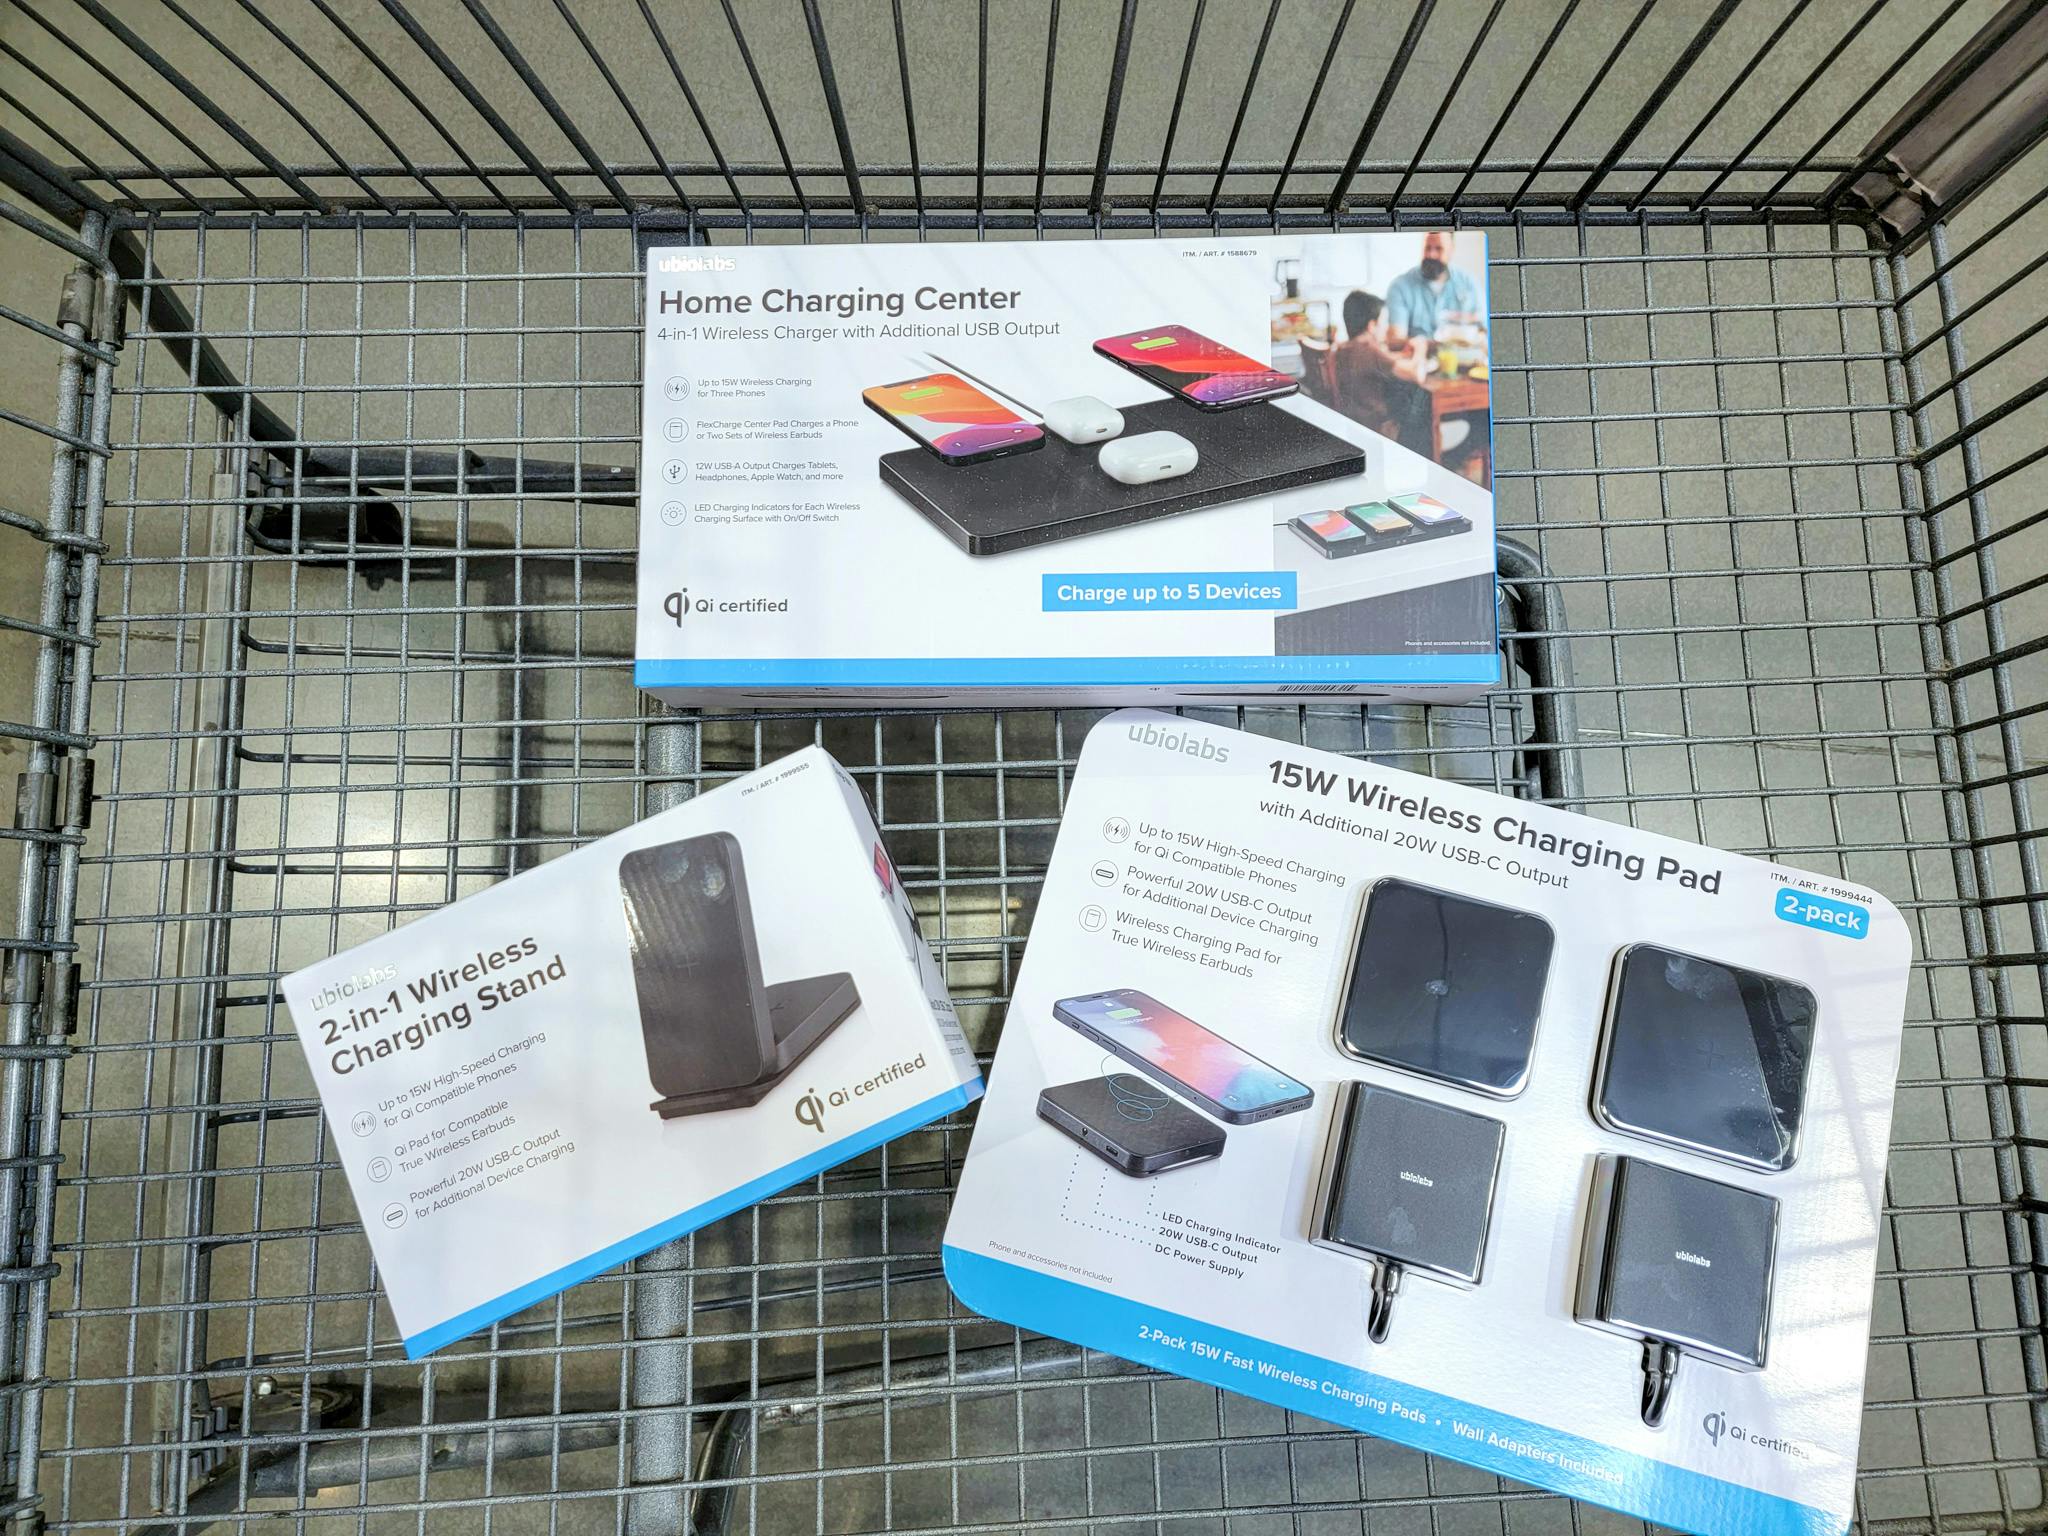 ubio-labs-wireless-charging-stations-as-low-as-9-97-at-costco-the